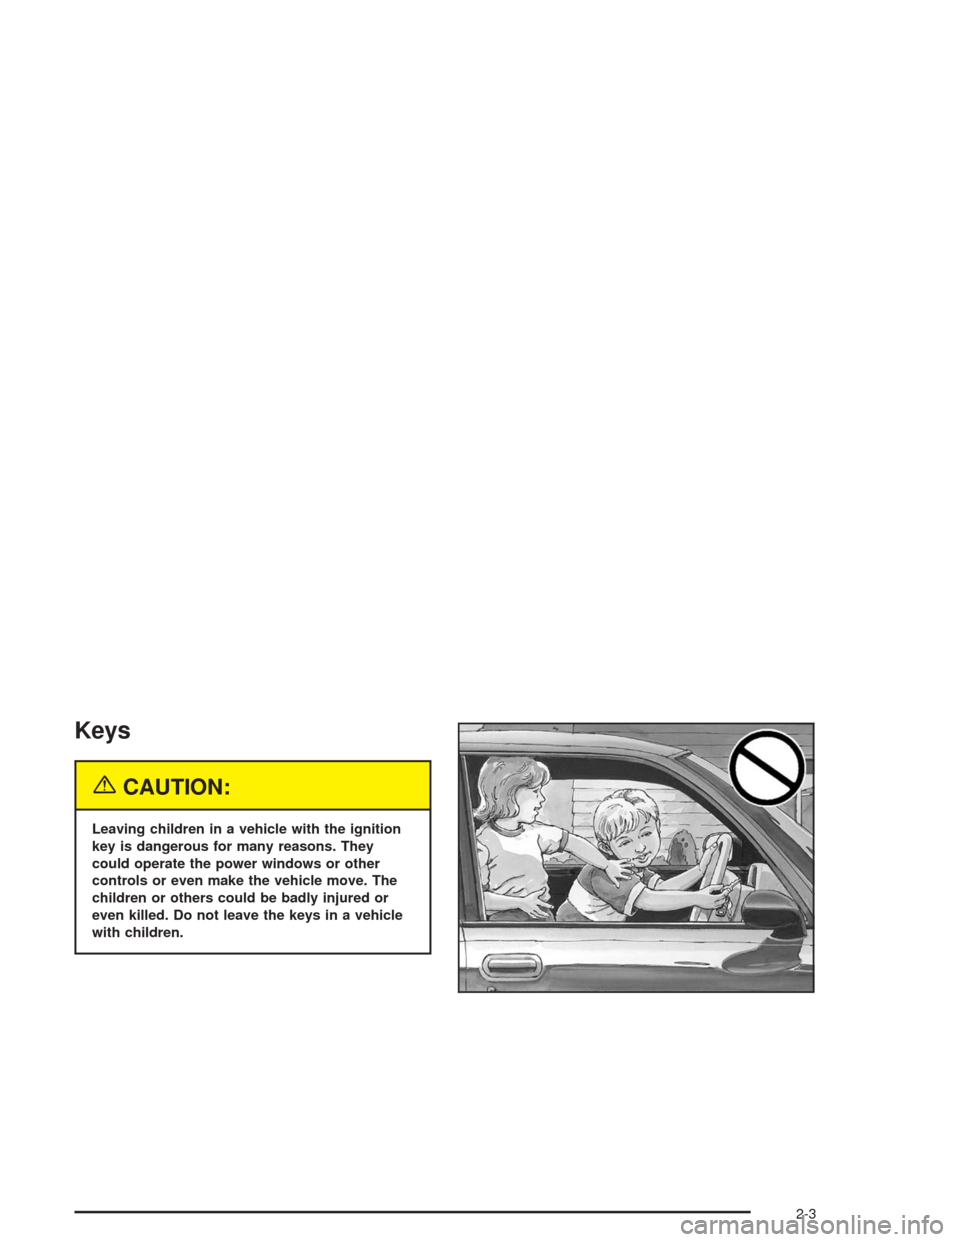 Oldsmobile Bravada 2004  Owners Manuals Keys
{CAUTION:
Leaving children in a vehicle with the ignition
key is dangerous for many reasons. They
could operate the power windows or other
controls or even make the vehicle move. The
children or 